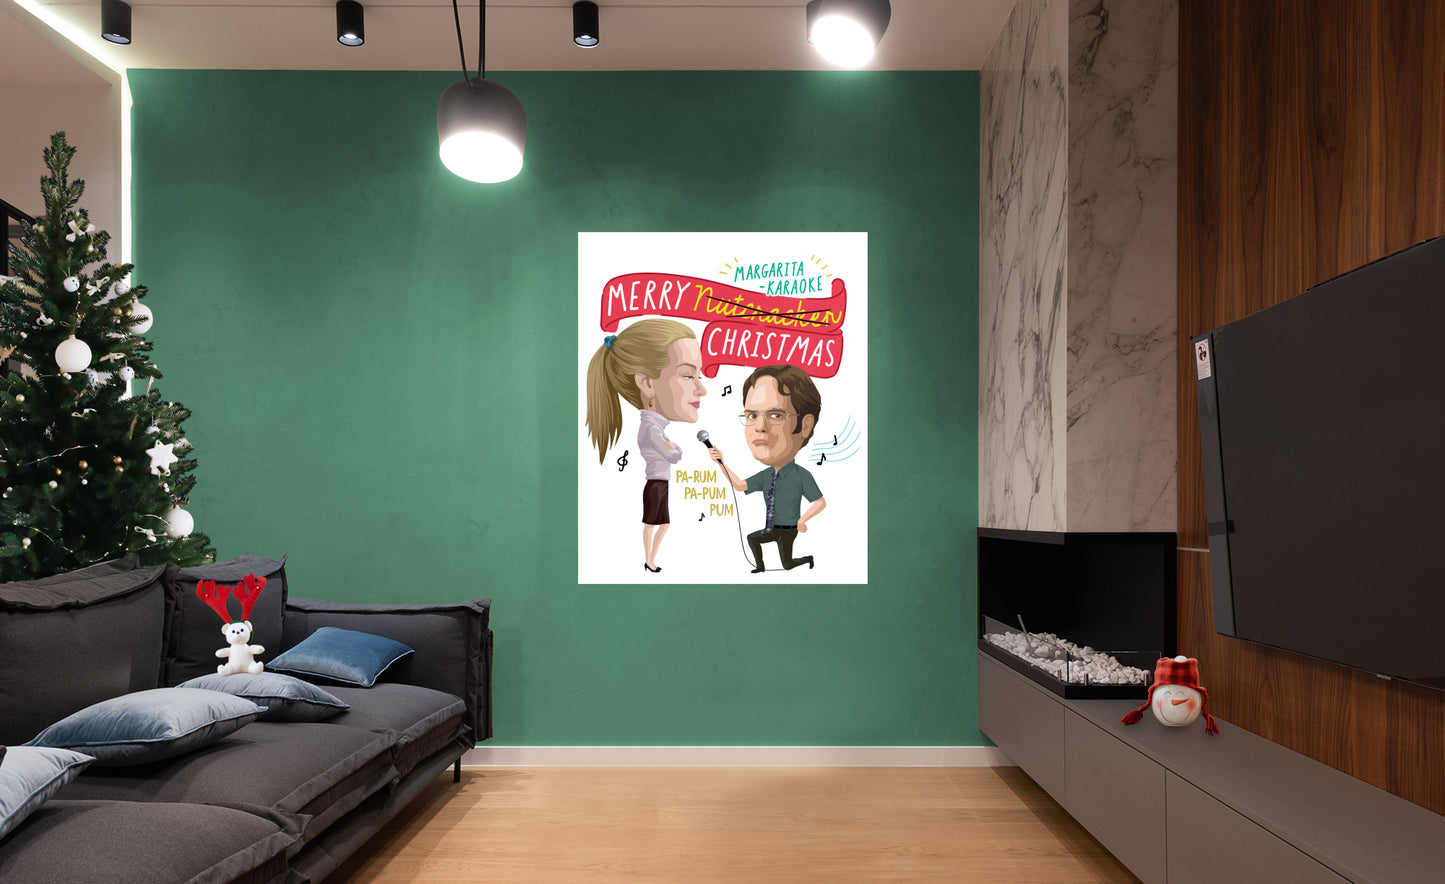 The Office: Dwight, Angela Margarita Karaoke Mural - Officially Licensed NBC Universal Removable Adhesive Decal